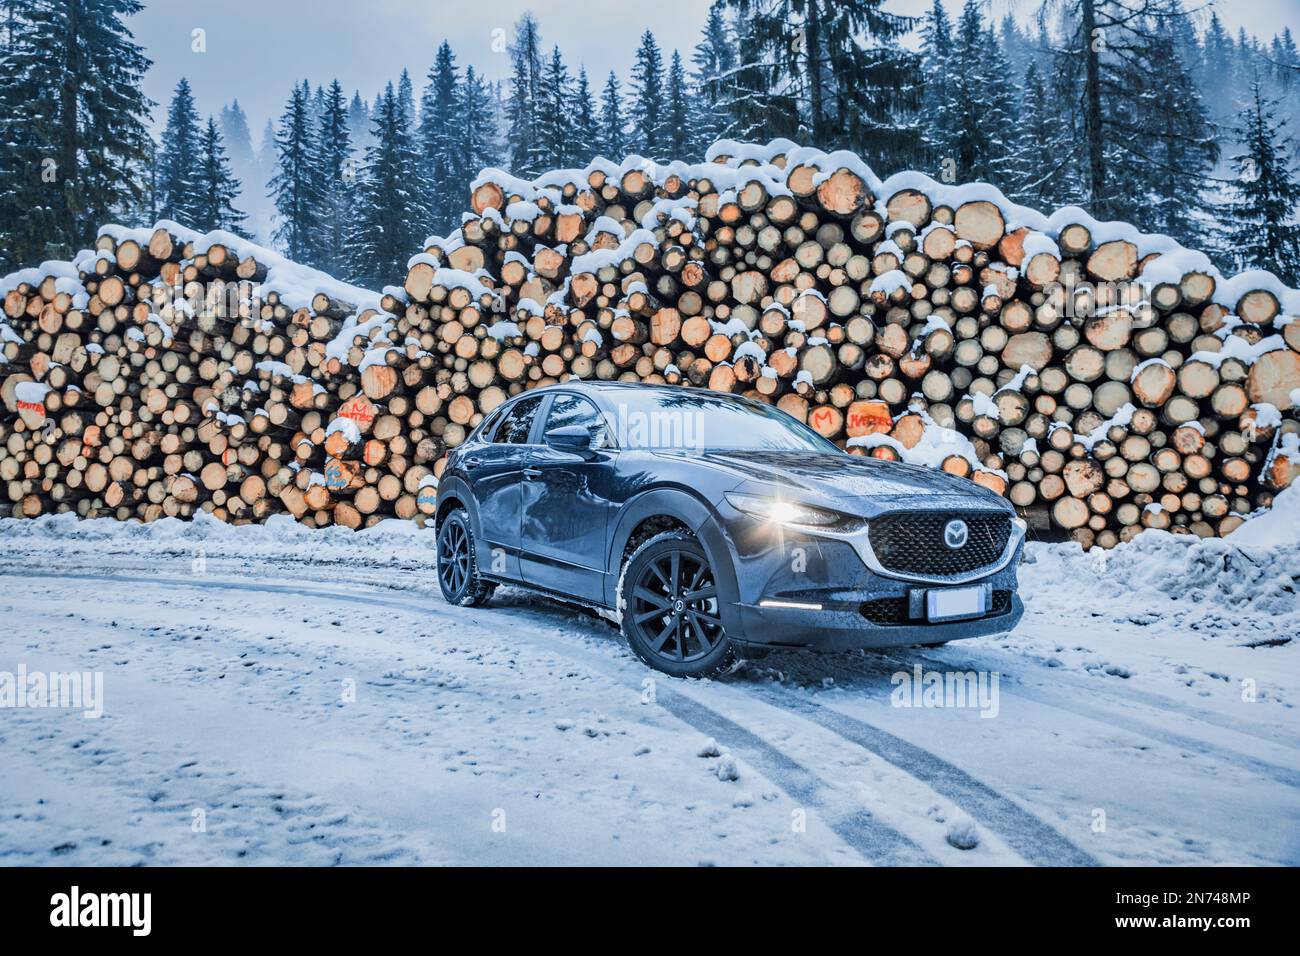 Italy, Veneto, Belluno, a Mazda Motor Corp. CX-30 crossover sport utility vehicle (SUV) in winter parked near a pile of fir logs in Dolomites Stock Photo